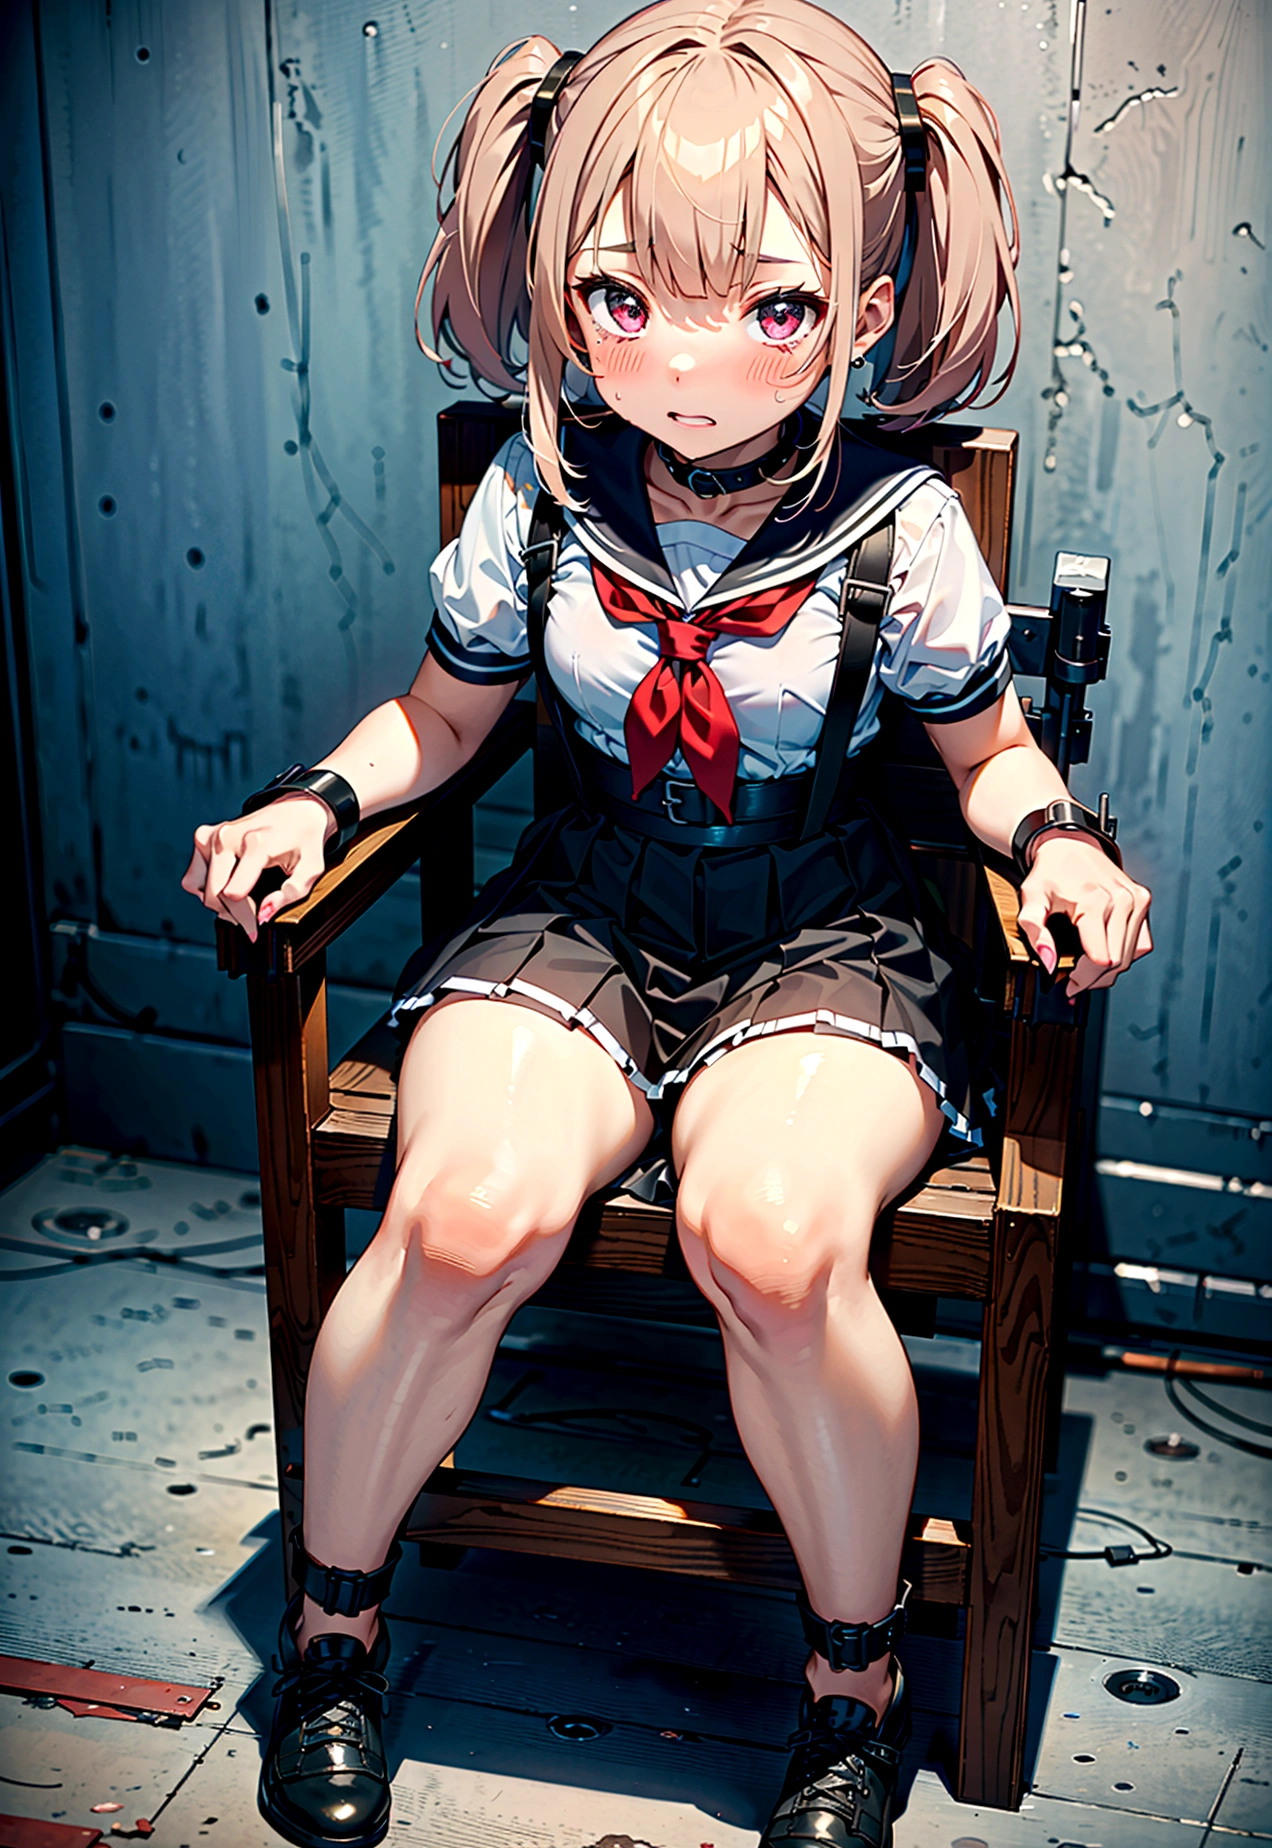 1 girl, (blushing, terrified, crying), tied to a chair, straped to chair, ring gag (short sleeve, mini-skirt, sailor uniform), (inside basement, underground), (wrist cuffs, ankle cuffs, wrists tied, ankles tied), perfect body, detailed face, detailed eyes, full body, image taken from afar